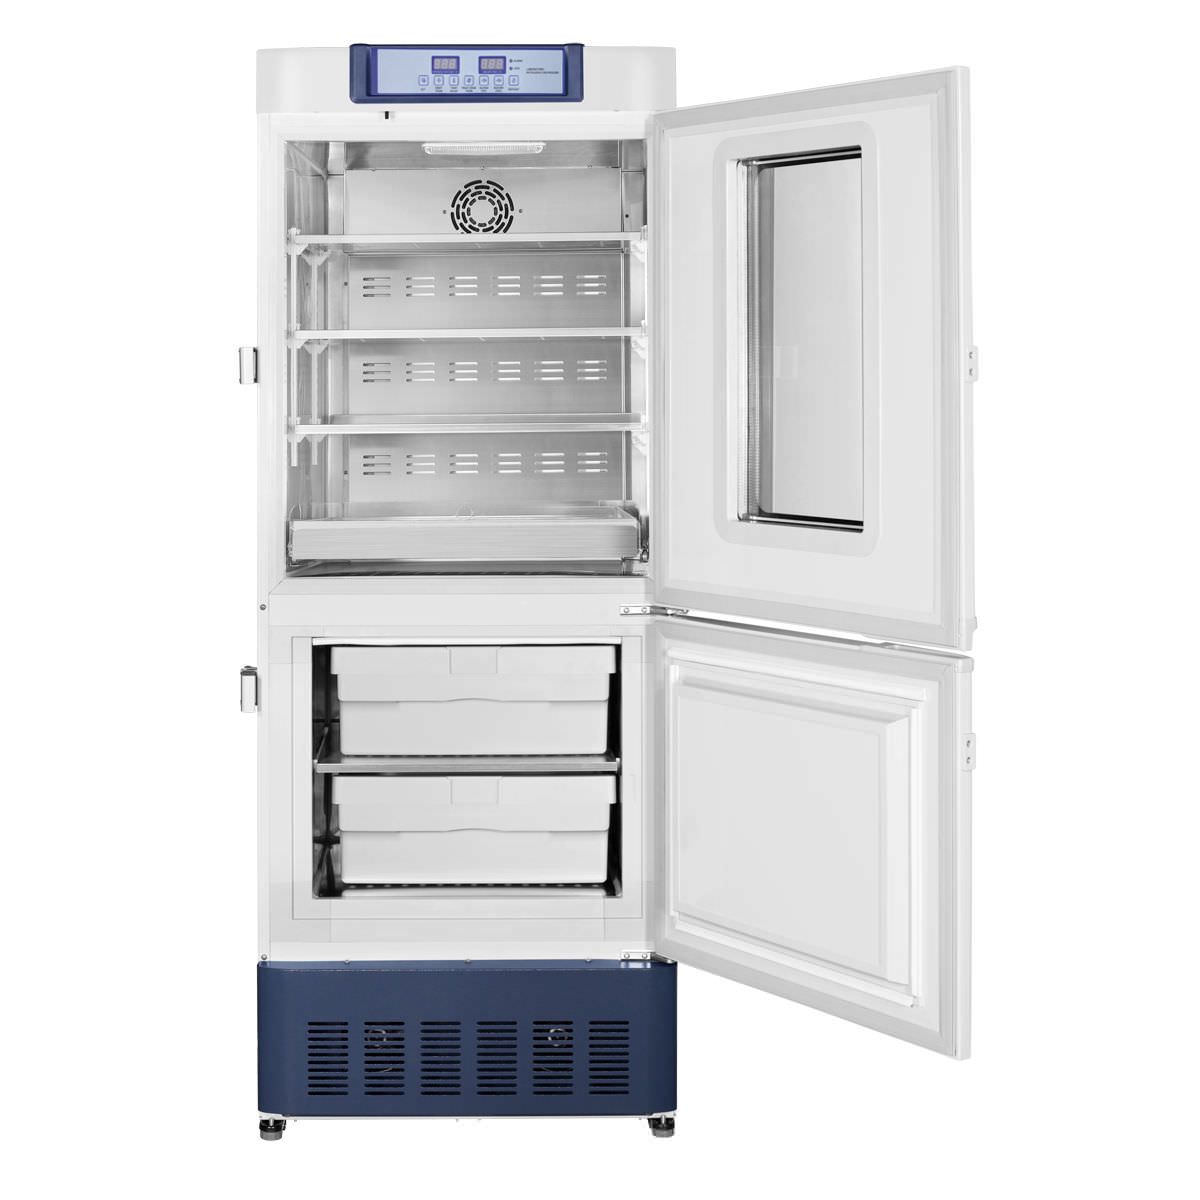 Laboratory refrigerator-freezer / upright / 2-door 2 °C ... 8 °C, -40 °C ... -20 °C, 185 L, 97 L | HYCD-282A Haier Medical and Laboratory Products